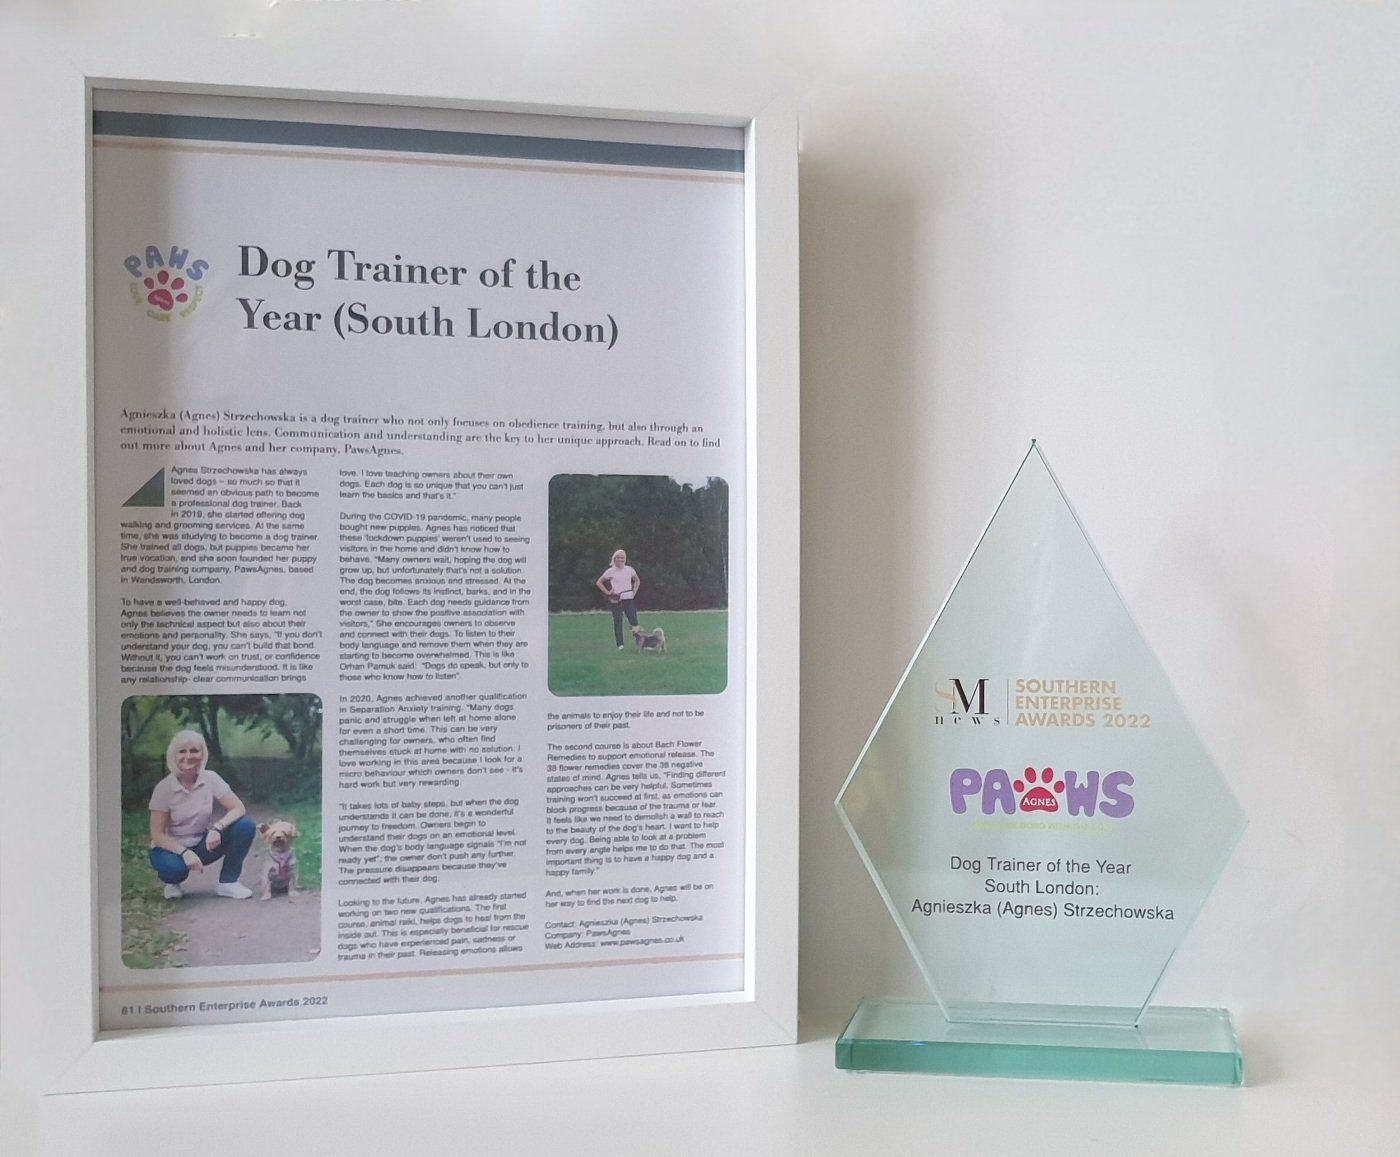 A framed article and the glass diamond-shaped trophy for the Dog Trainer of the Year South London award.